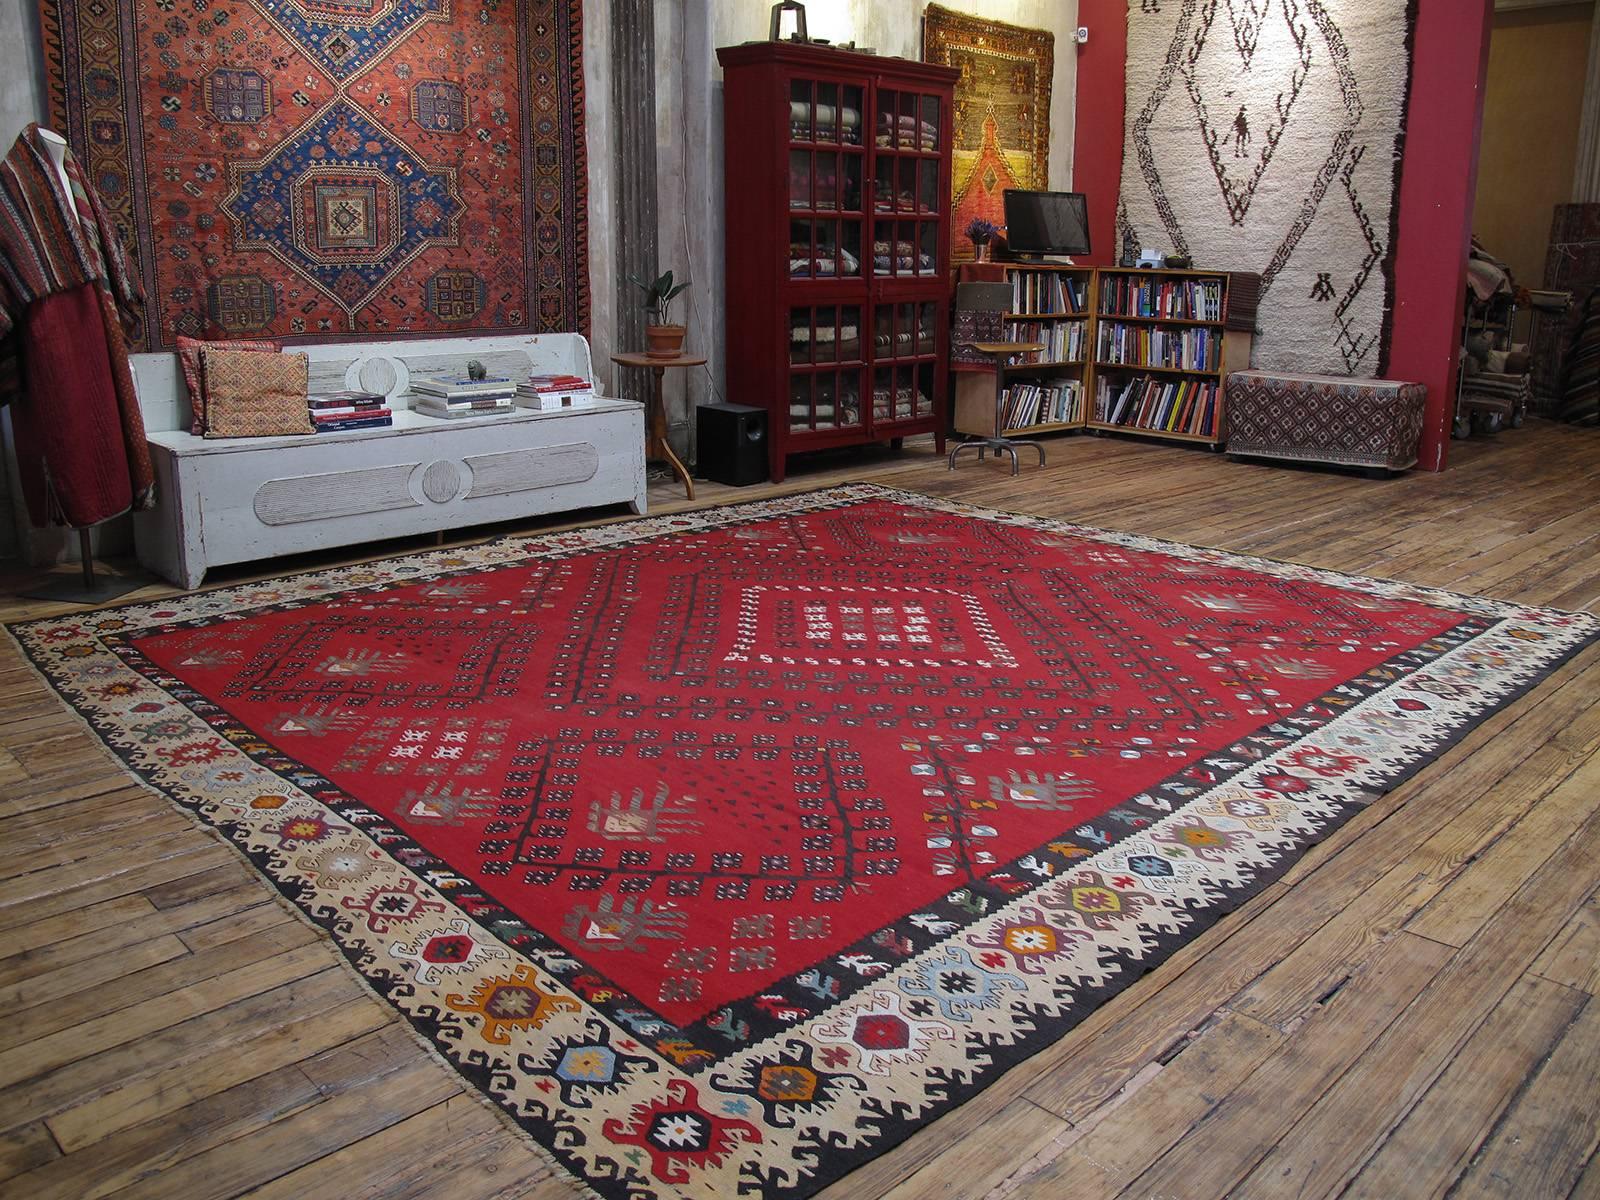 A great Kilim in one of the classical designs of this region, once part of the Ottoman Empire. A generation younger than the antique Sarkoy, this is still a very high quality example with wonderful colors, patina and nearly square proportions. It is